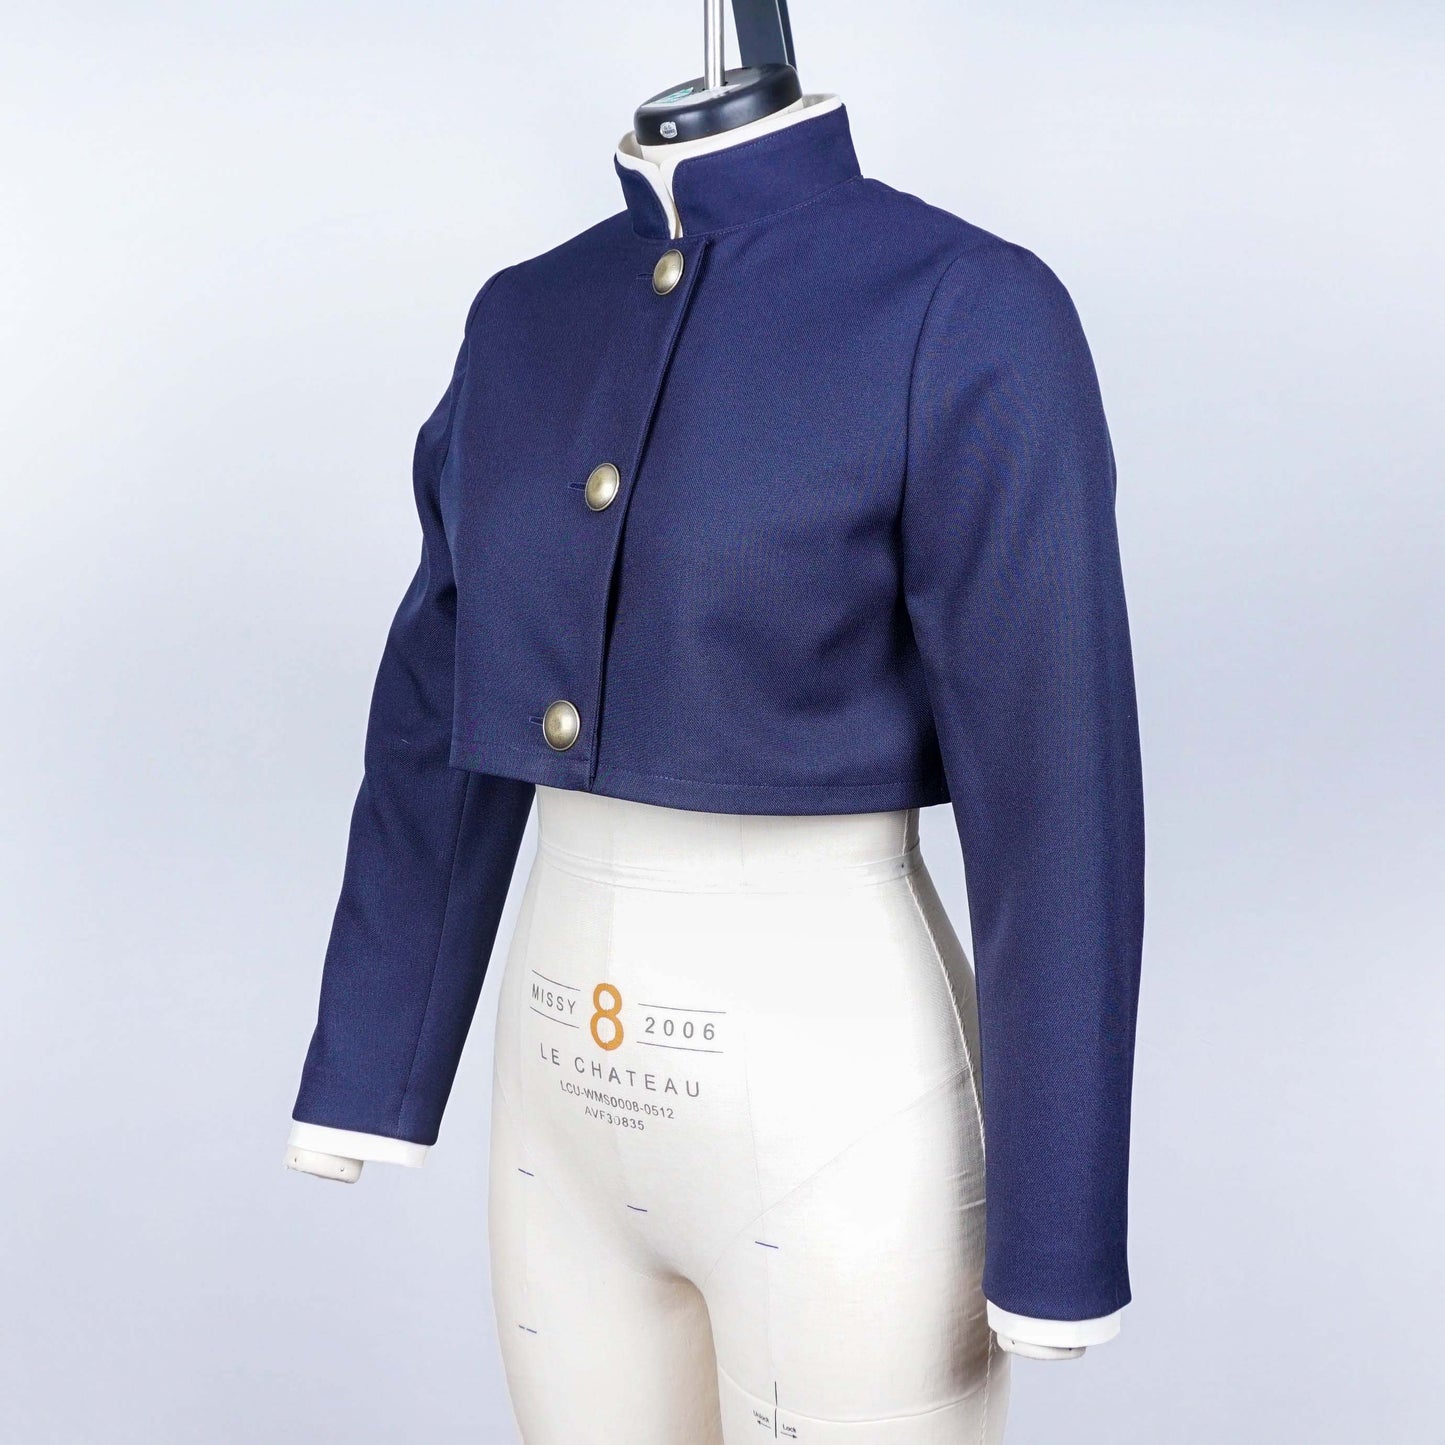 School Girl Crop Jacket Sewing Pattern/Downloadable PDF File and Tutorial Book